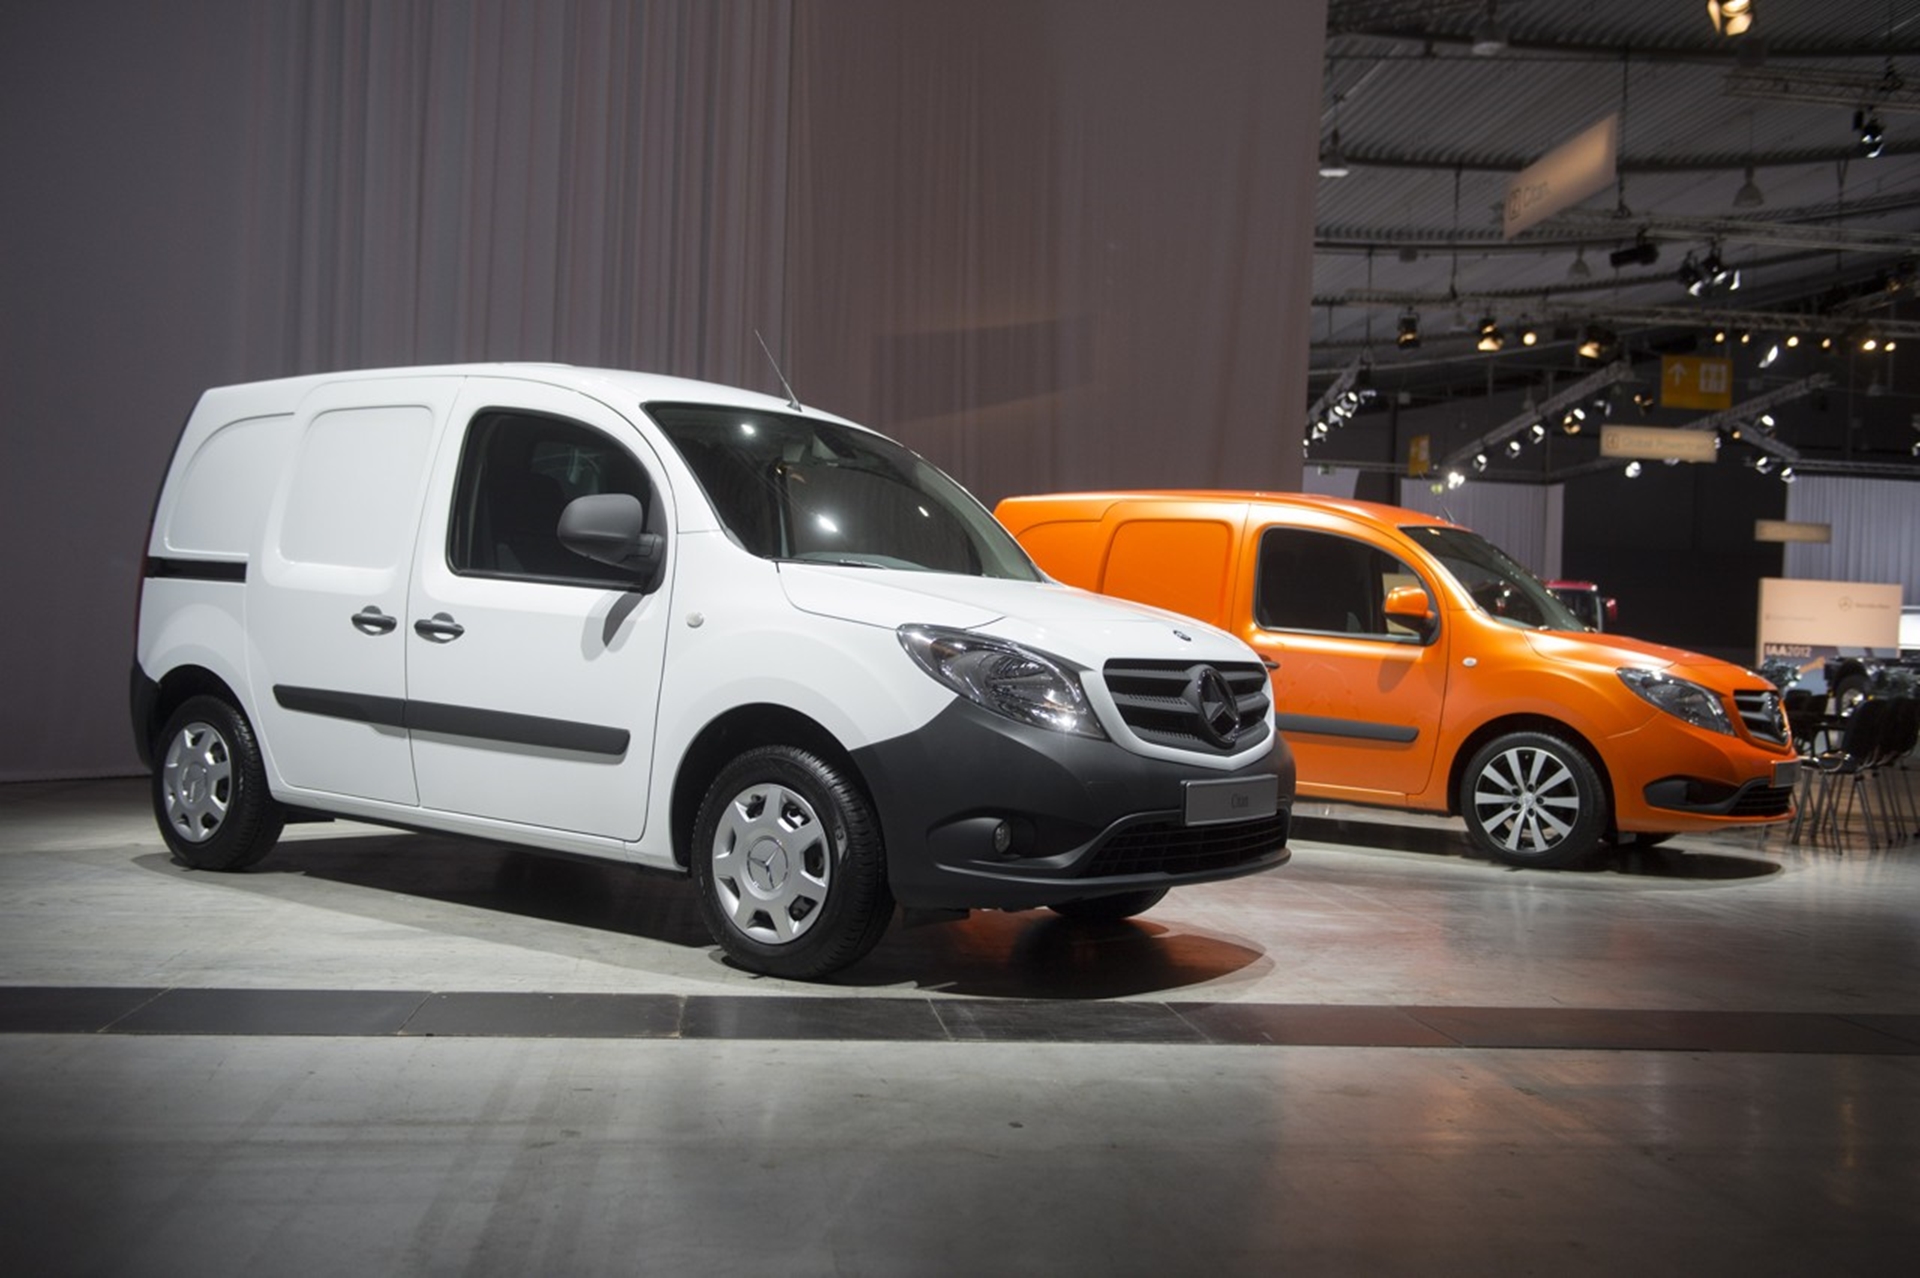 The New Mercedes-Benz Citan: the pro among urban delivery vans